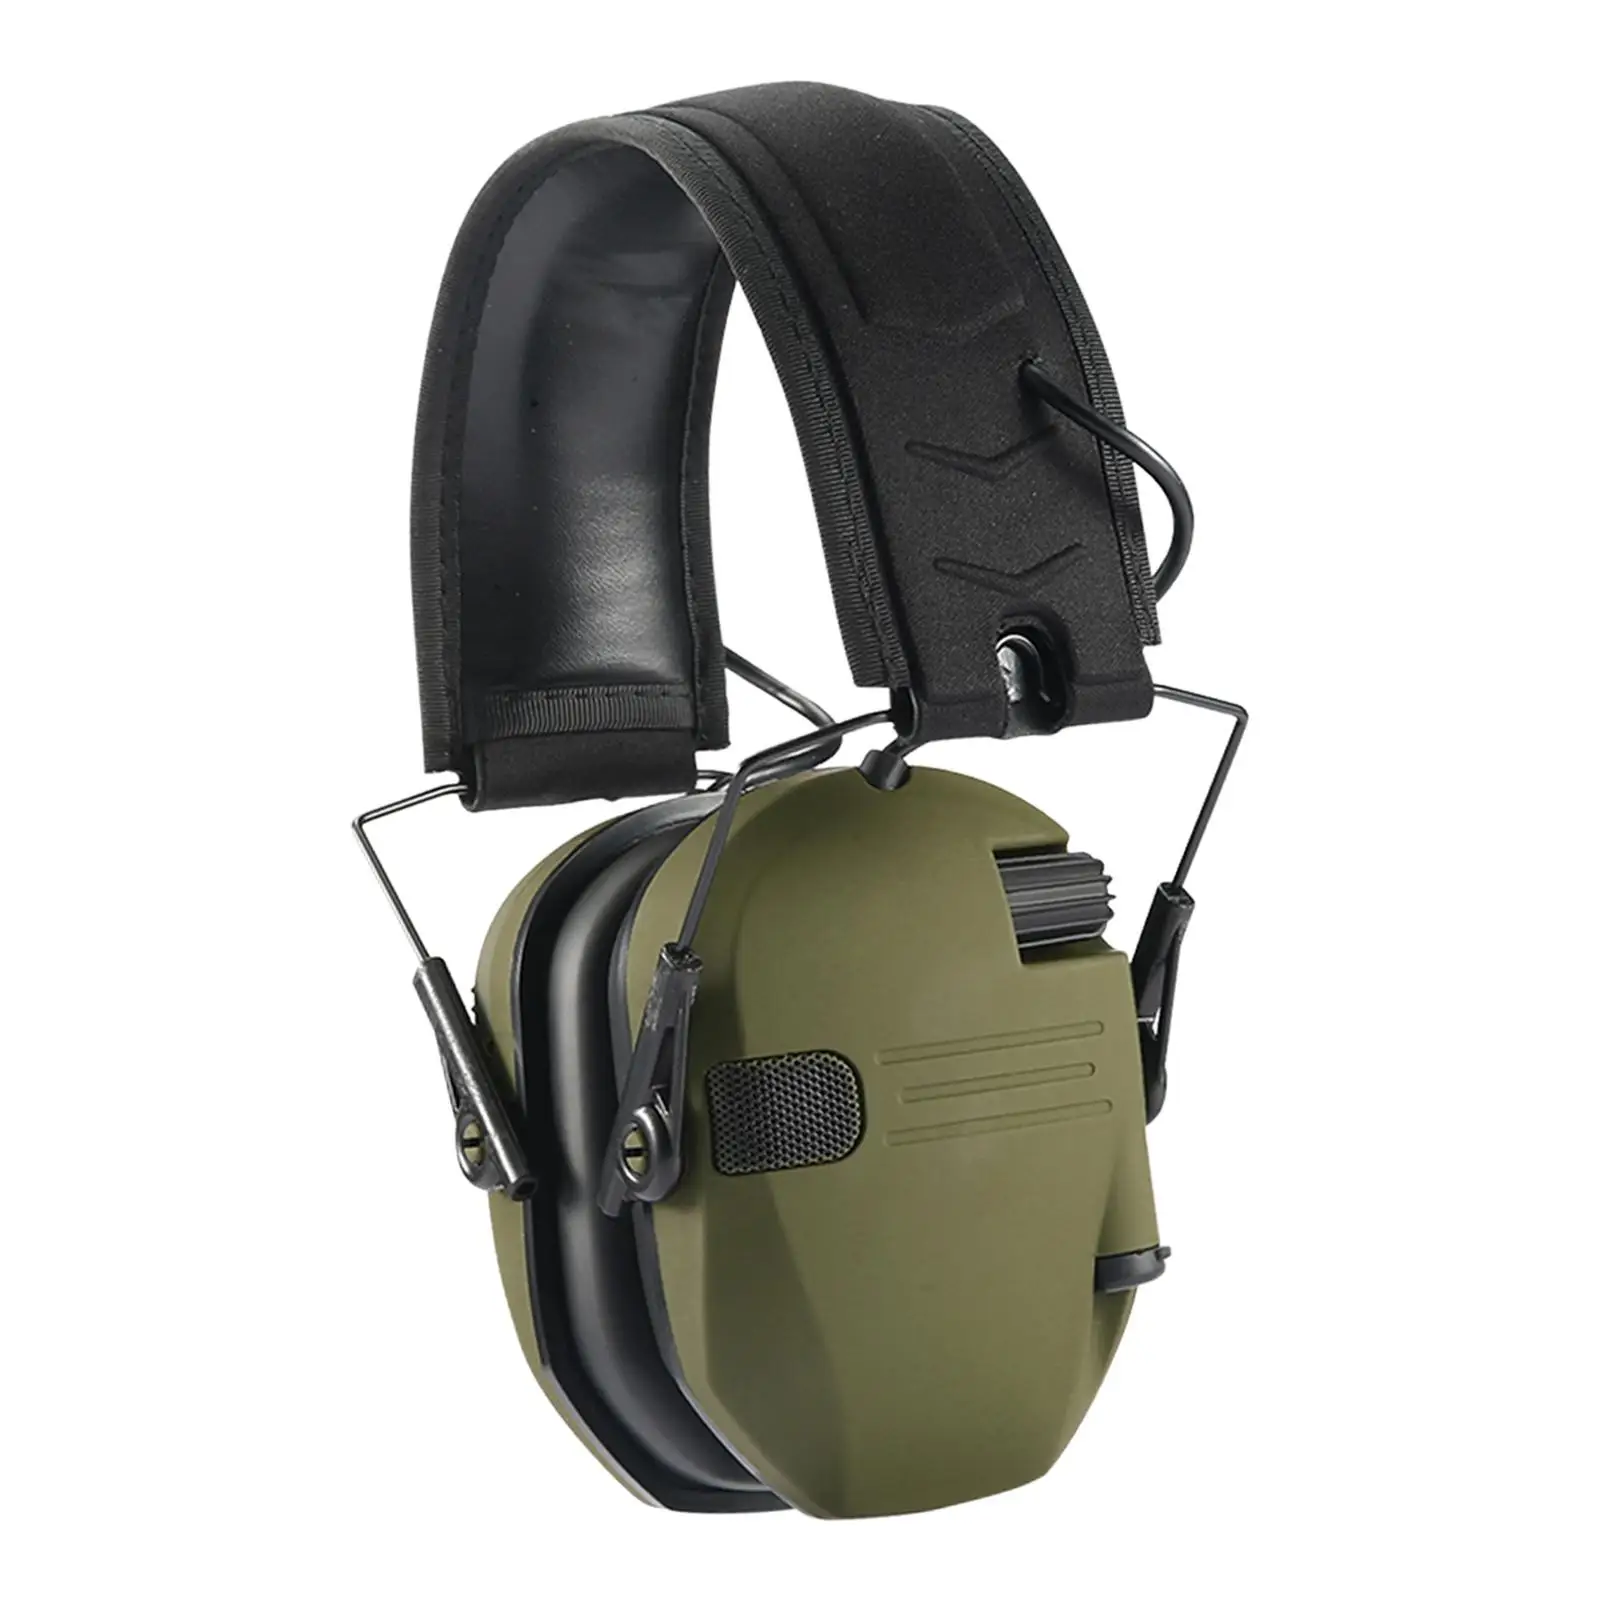 Electronic Earmuffs Soundproof Safety Ear Protection Head Mounted Noise Reduction Ear Muffs for Study Work Mowing